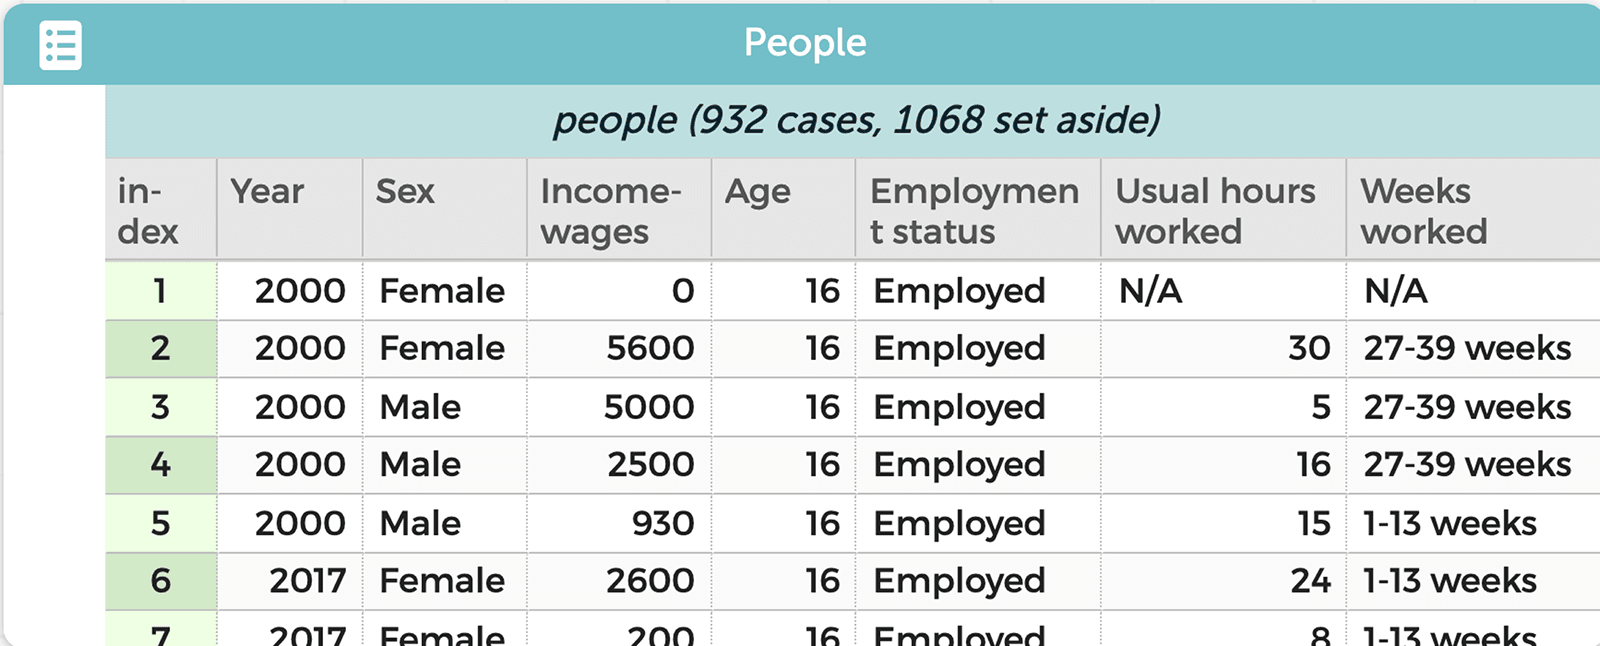 Census microdata with income and employment for 2000 and 2017. Each row represents an individual person. People not in the labor force have been set aside.